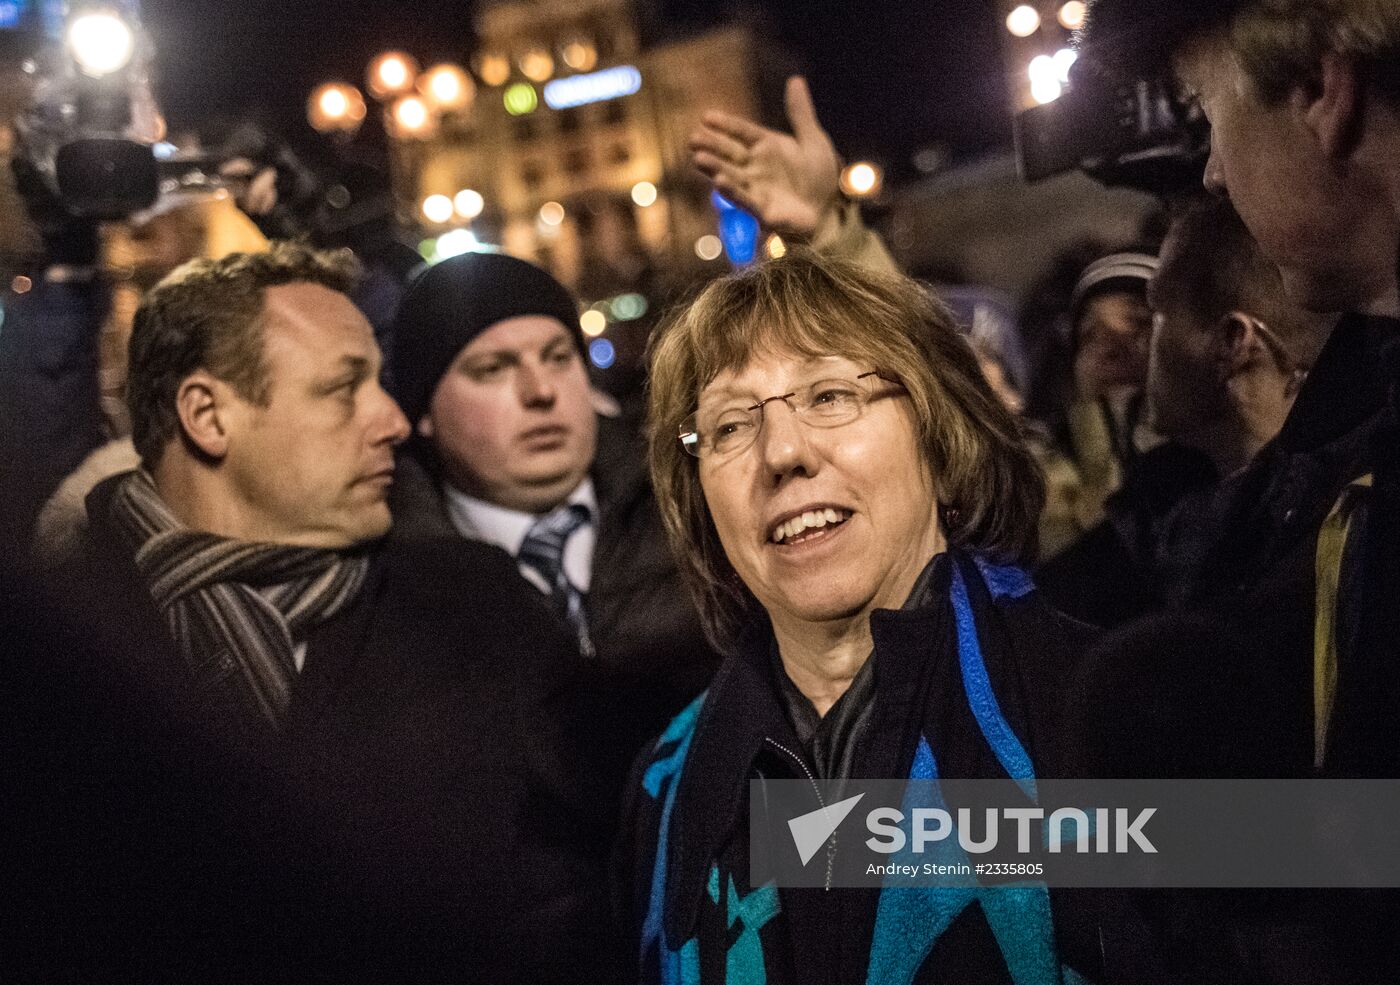 European Union foreign policy chief Catherine Ashton in Kiev's Independence Square